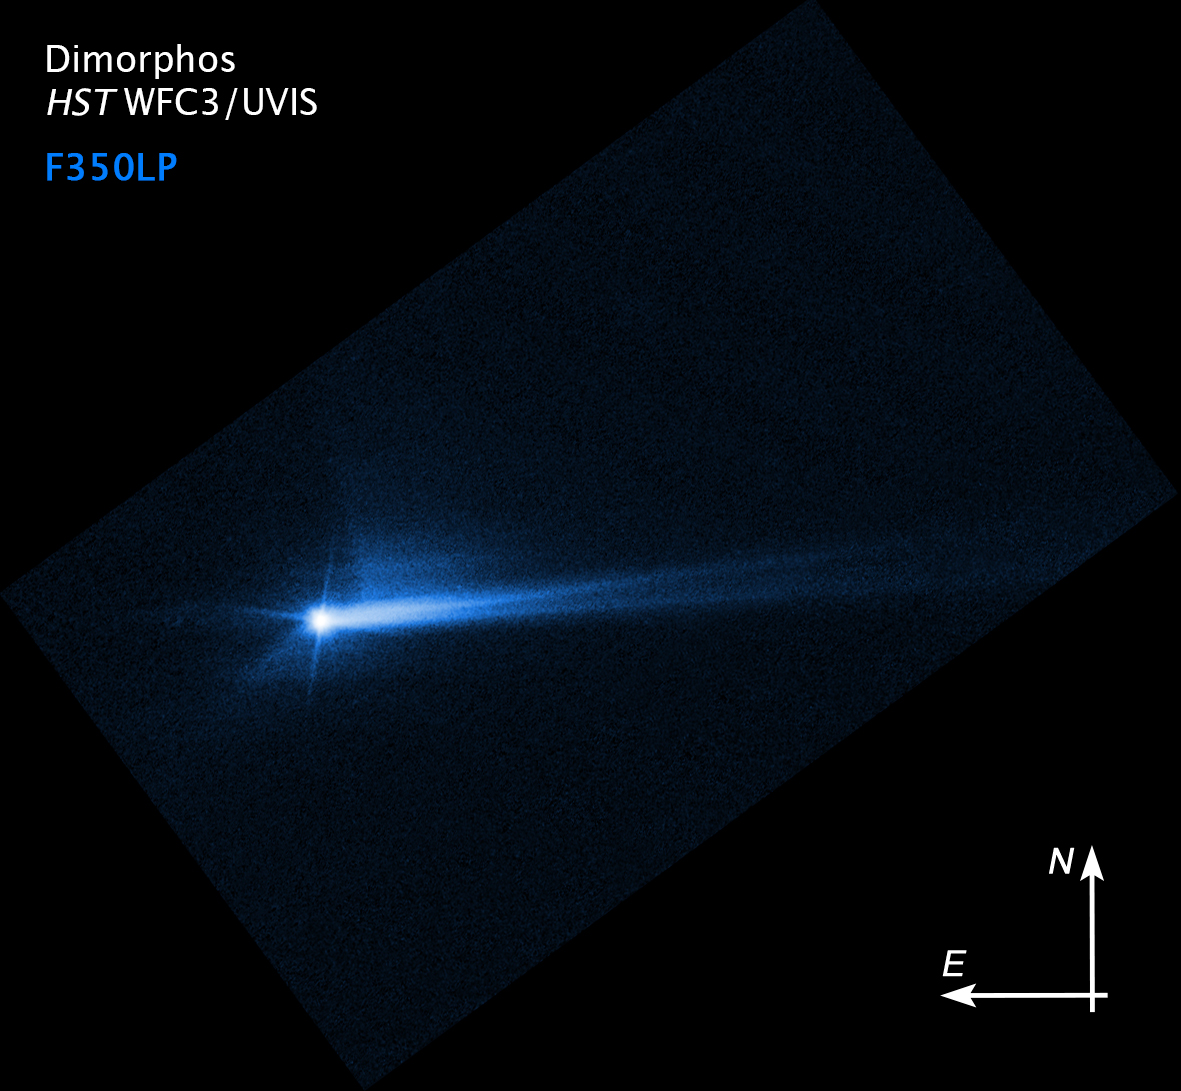 Image of Dimorphos after impact, looking like a blue comet with two tails streaming behind it